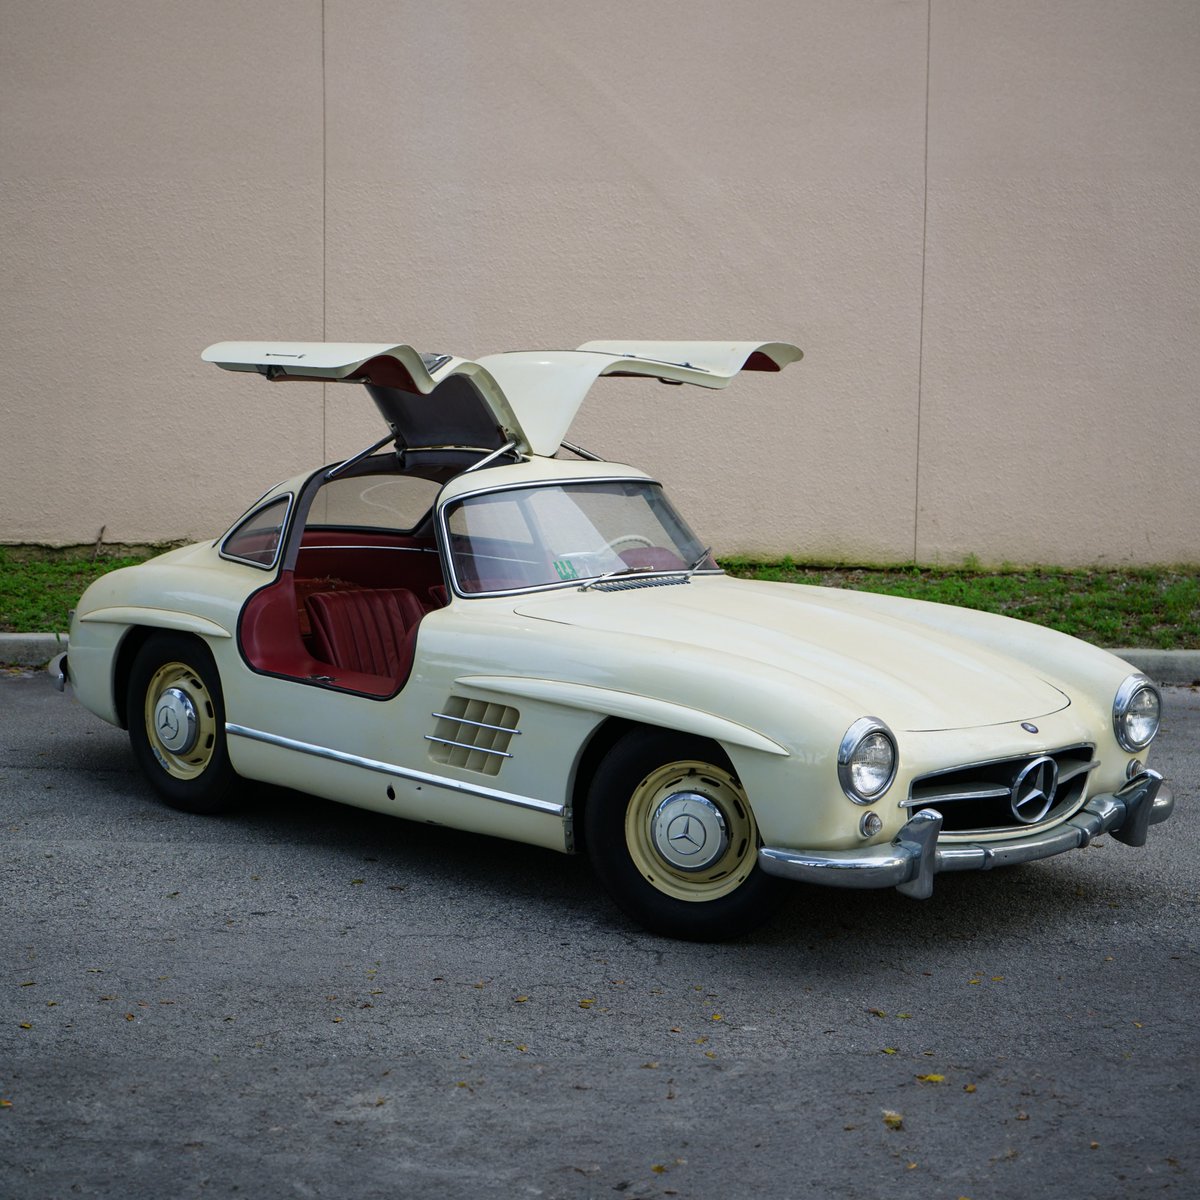 This 1955 Mercedes-Benz 300 SL 'Gullwing' Coupe is a charming time-capsule. Since 1979, this example has remained under single family ownership, and it currently registers 54,074 miles on the odometer.   

The Gullwing is currently on auction now!

📍West Palm Beach, Florida, USA